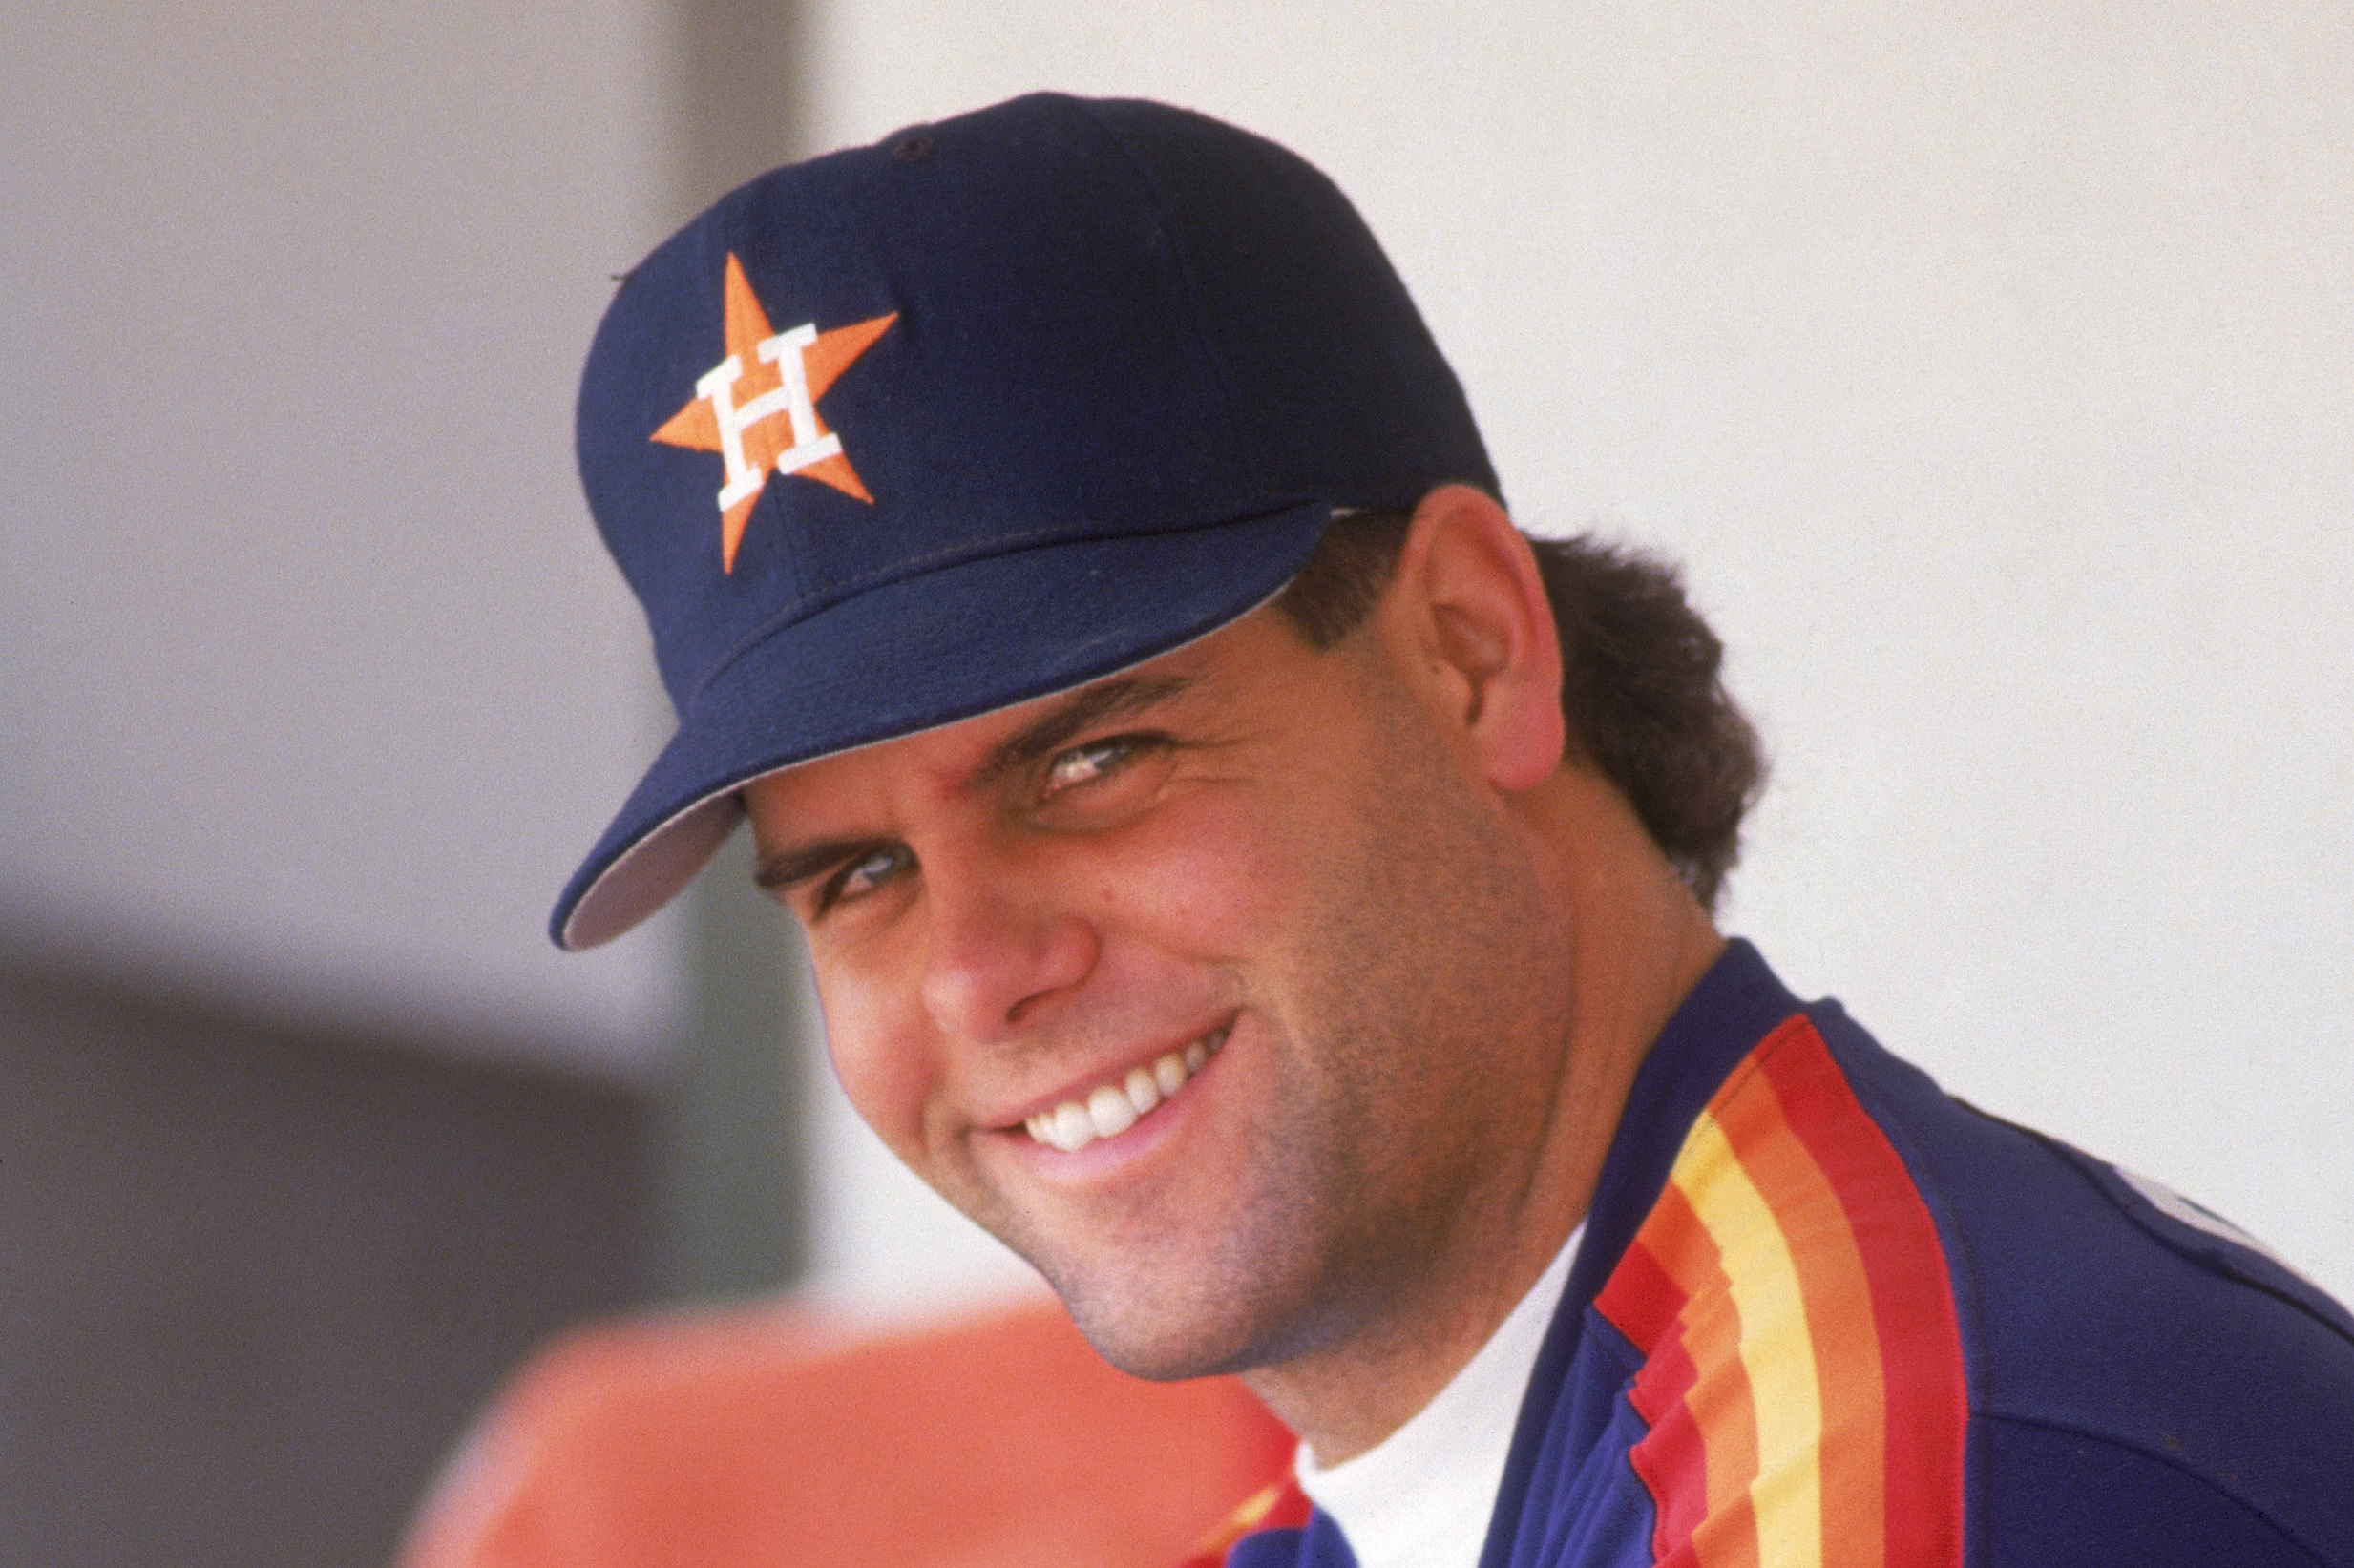 The Cautionary Tale of Ken Caminiti: The Steroid Era's First Truth